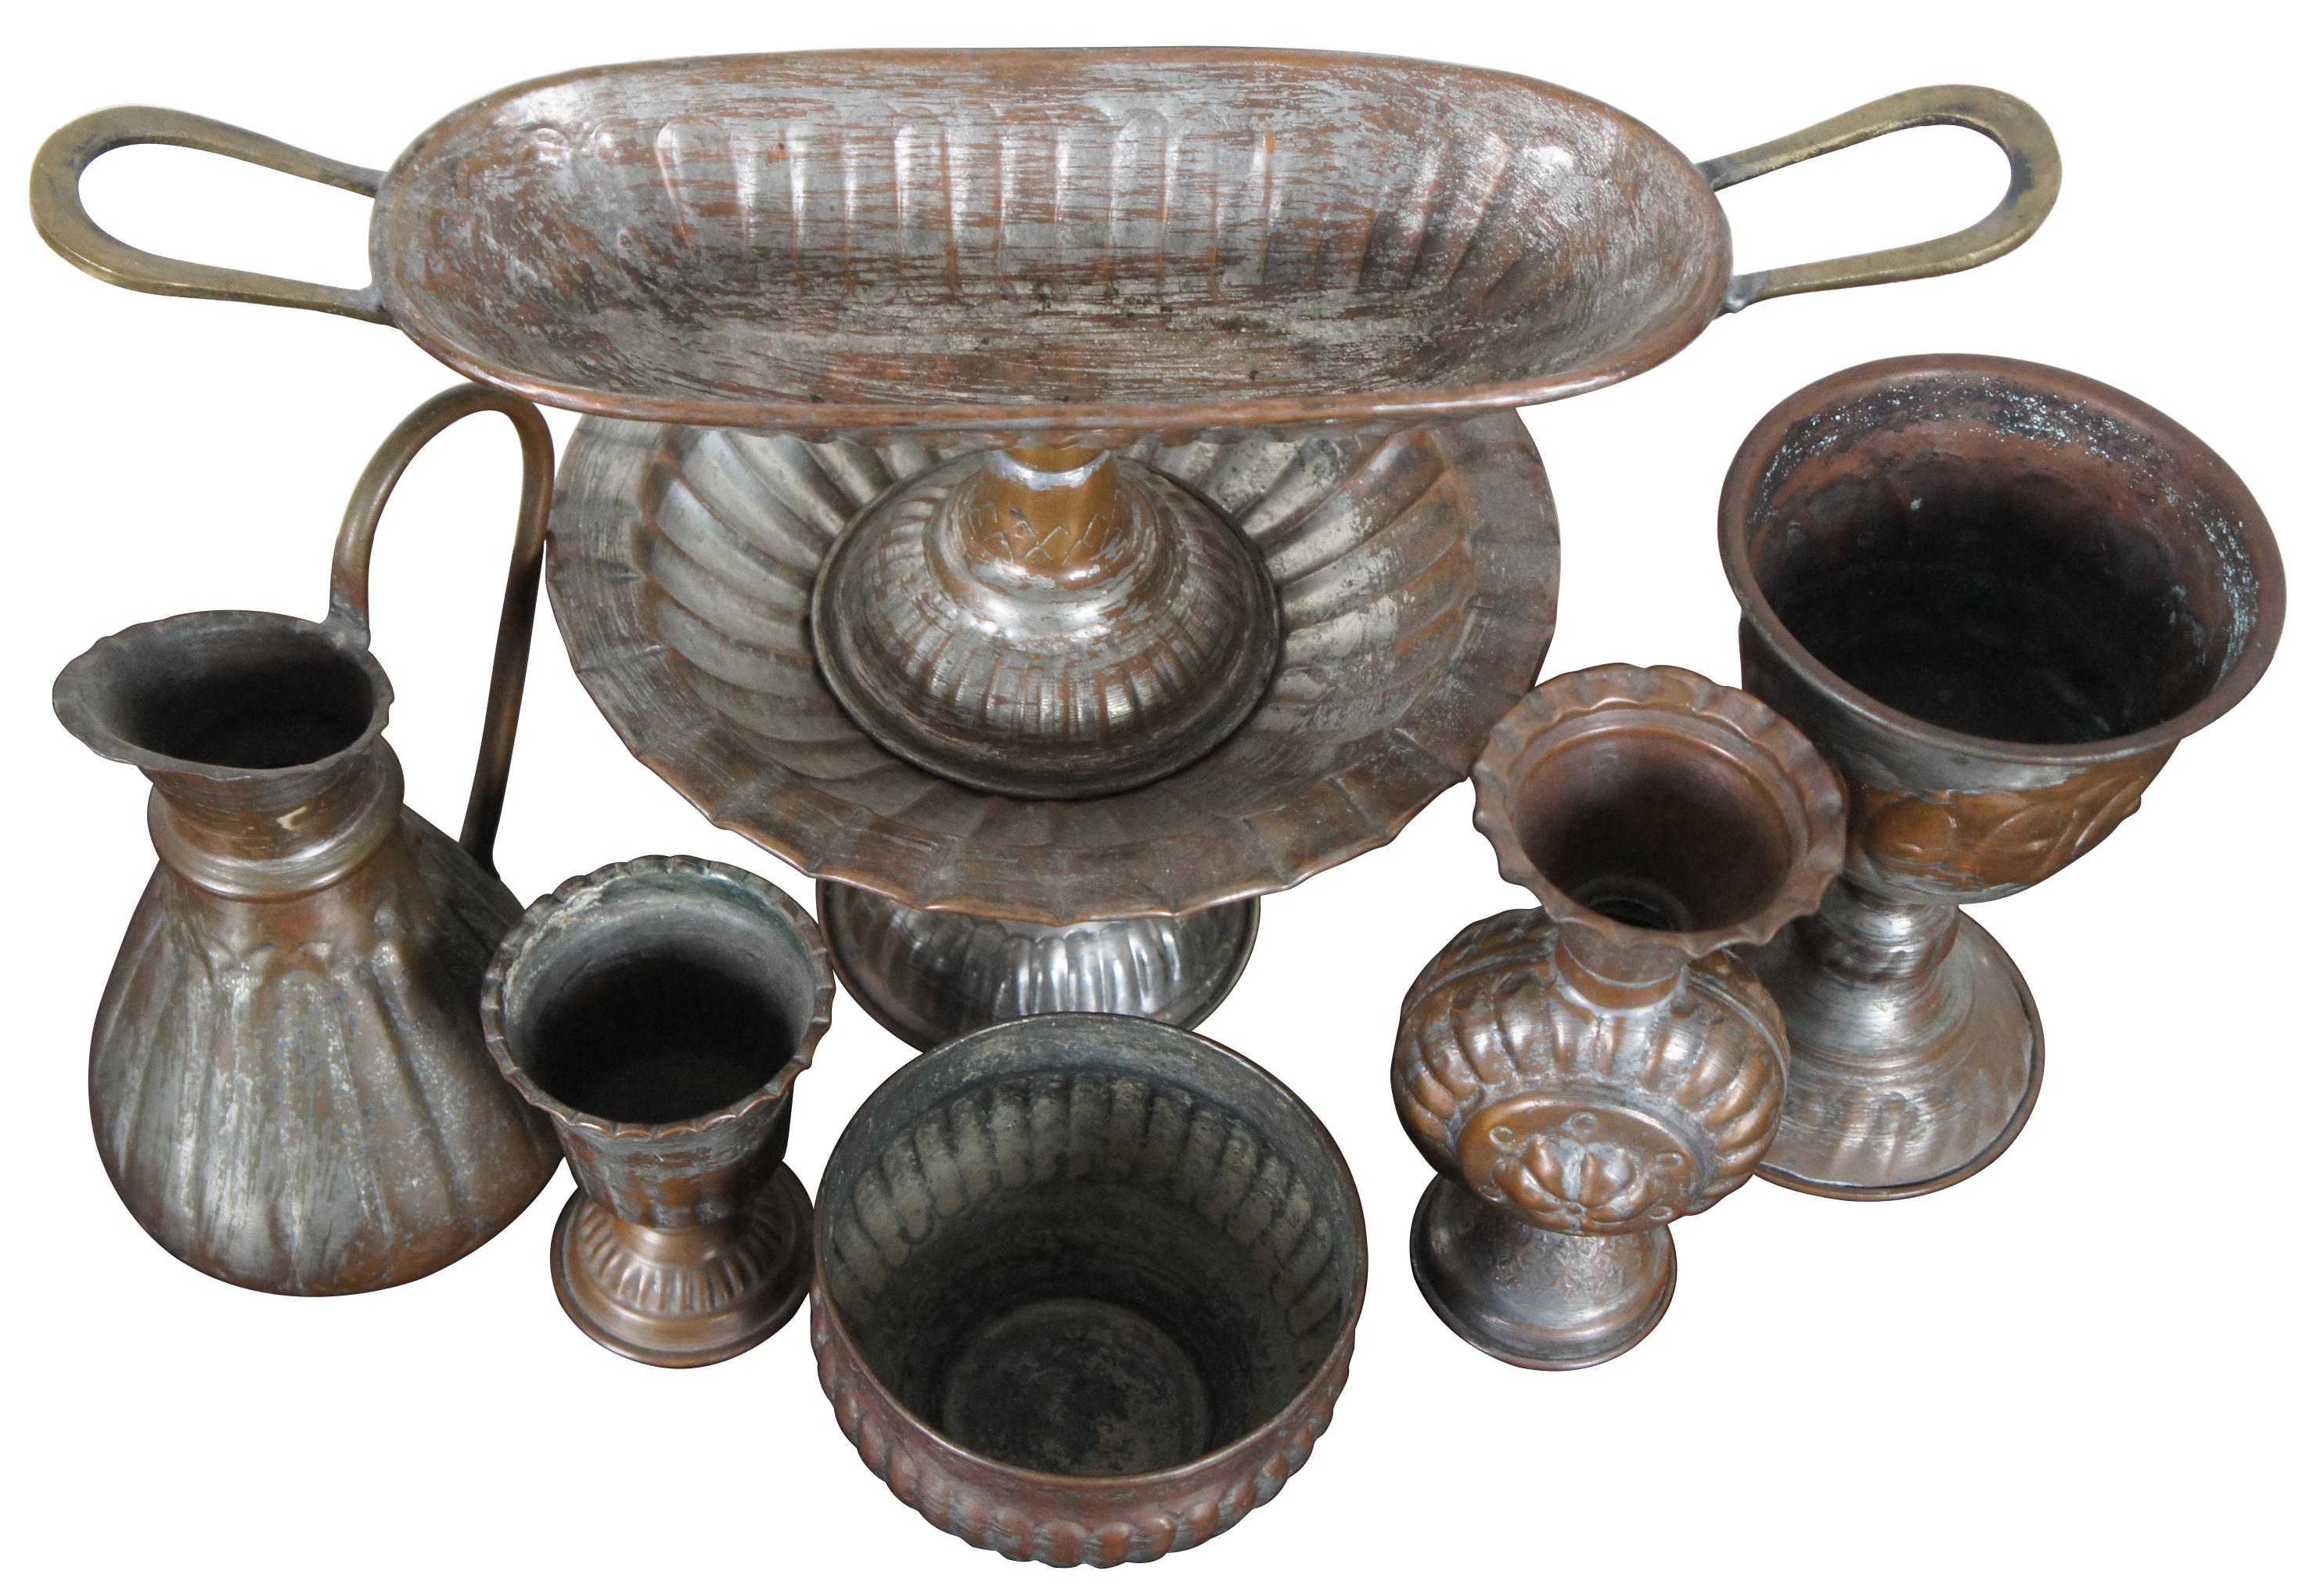 Lot of seven assorted vintage copper/tin pieces including two centerpiece compotes, a small pitcher, large goblet, small goblet, small planter and a vase. Only one hallmarked.

Largest Piece - 9” x 5.5” / Smallest Piece - 3” x 4” (Diameter x